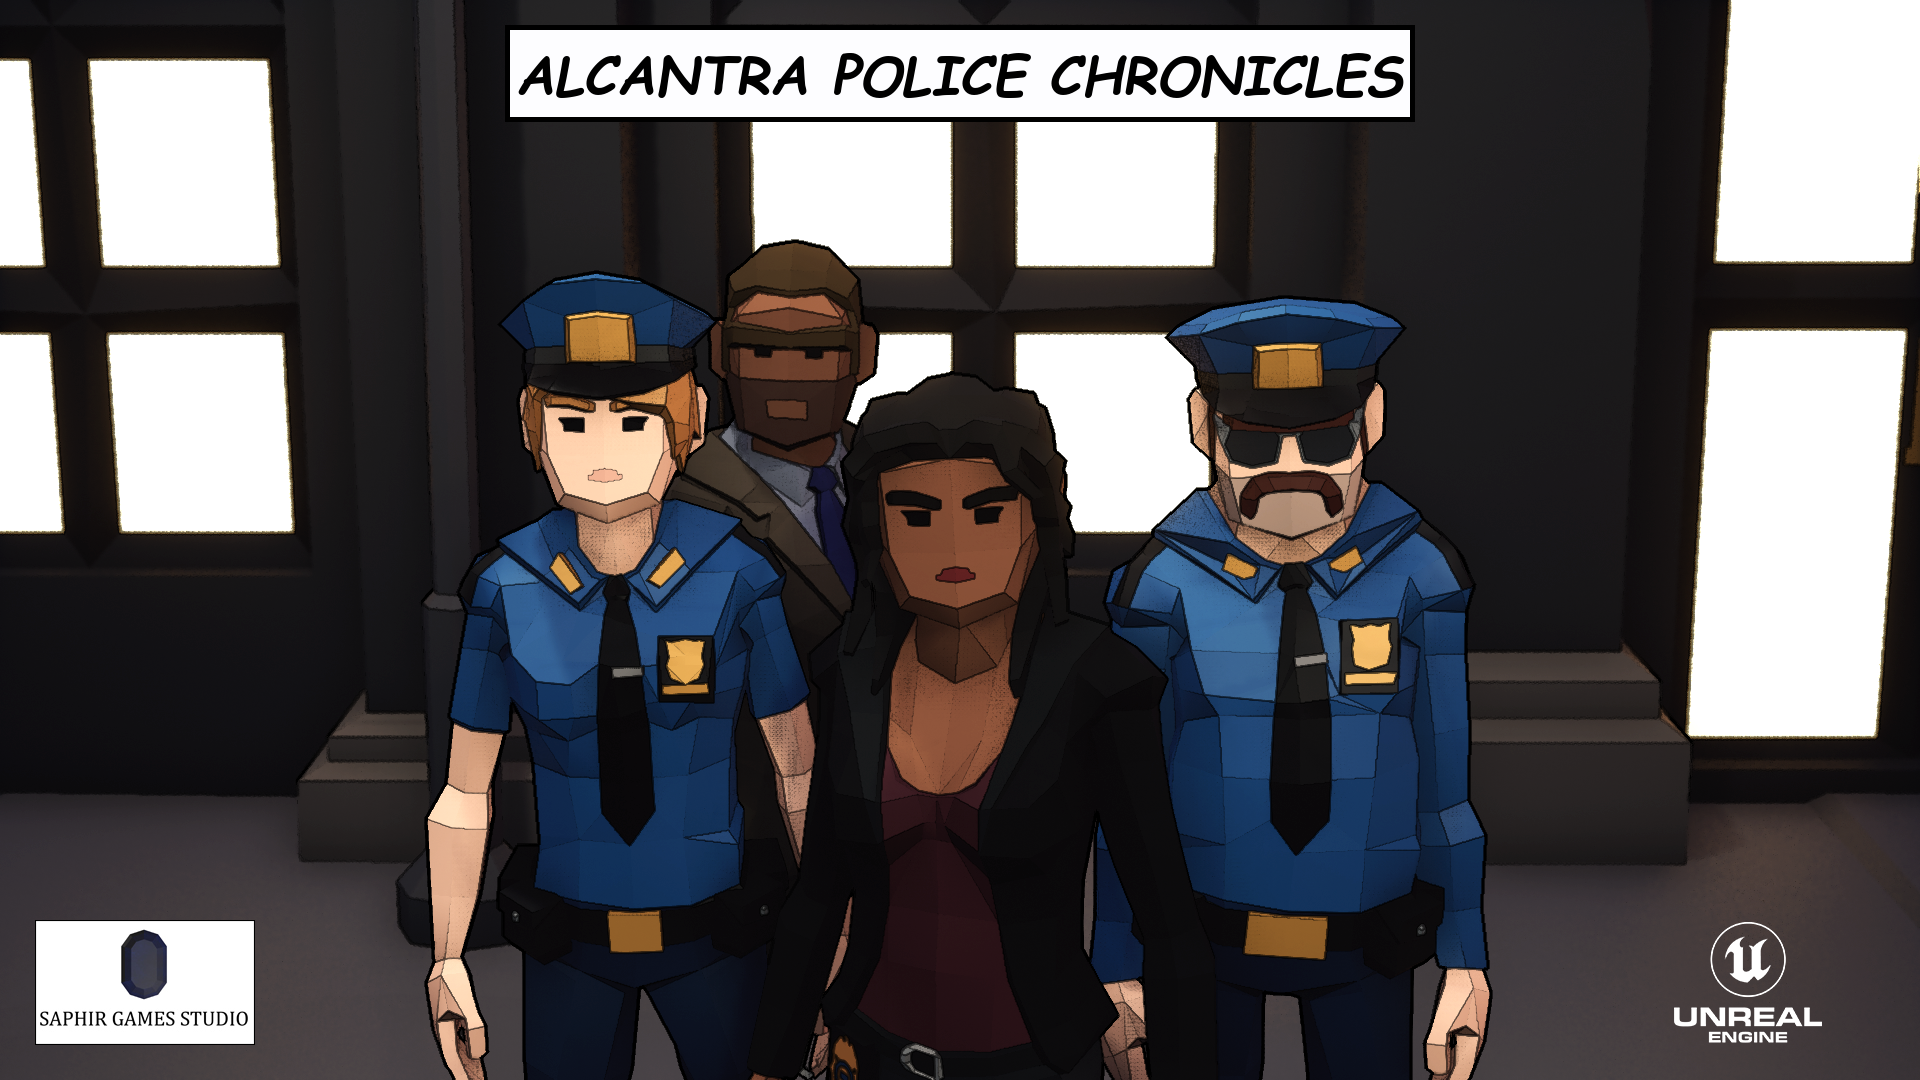 Alcantra Police Chronicles